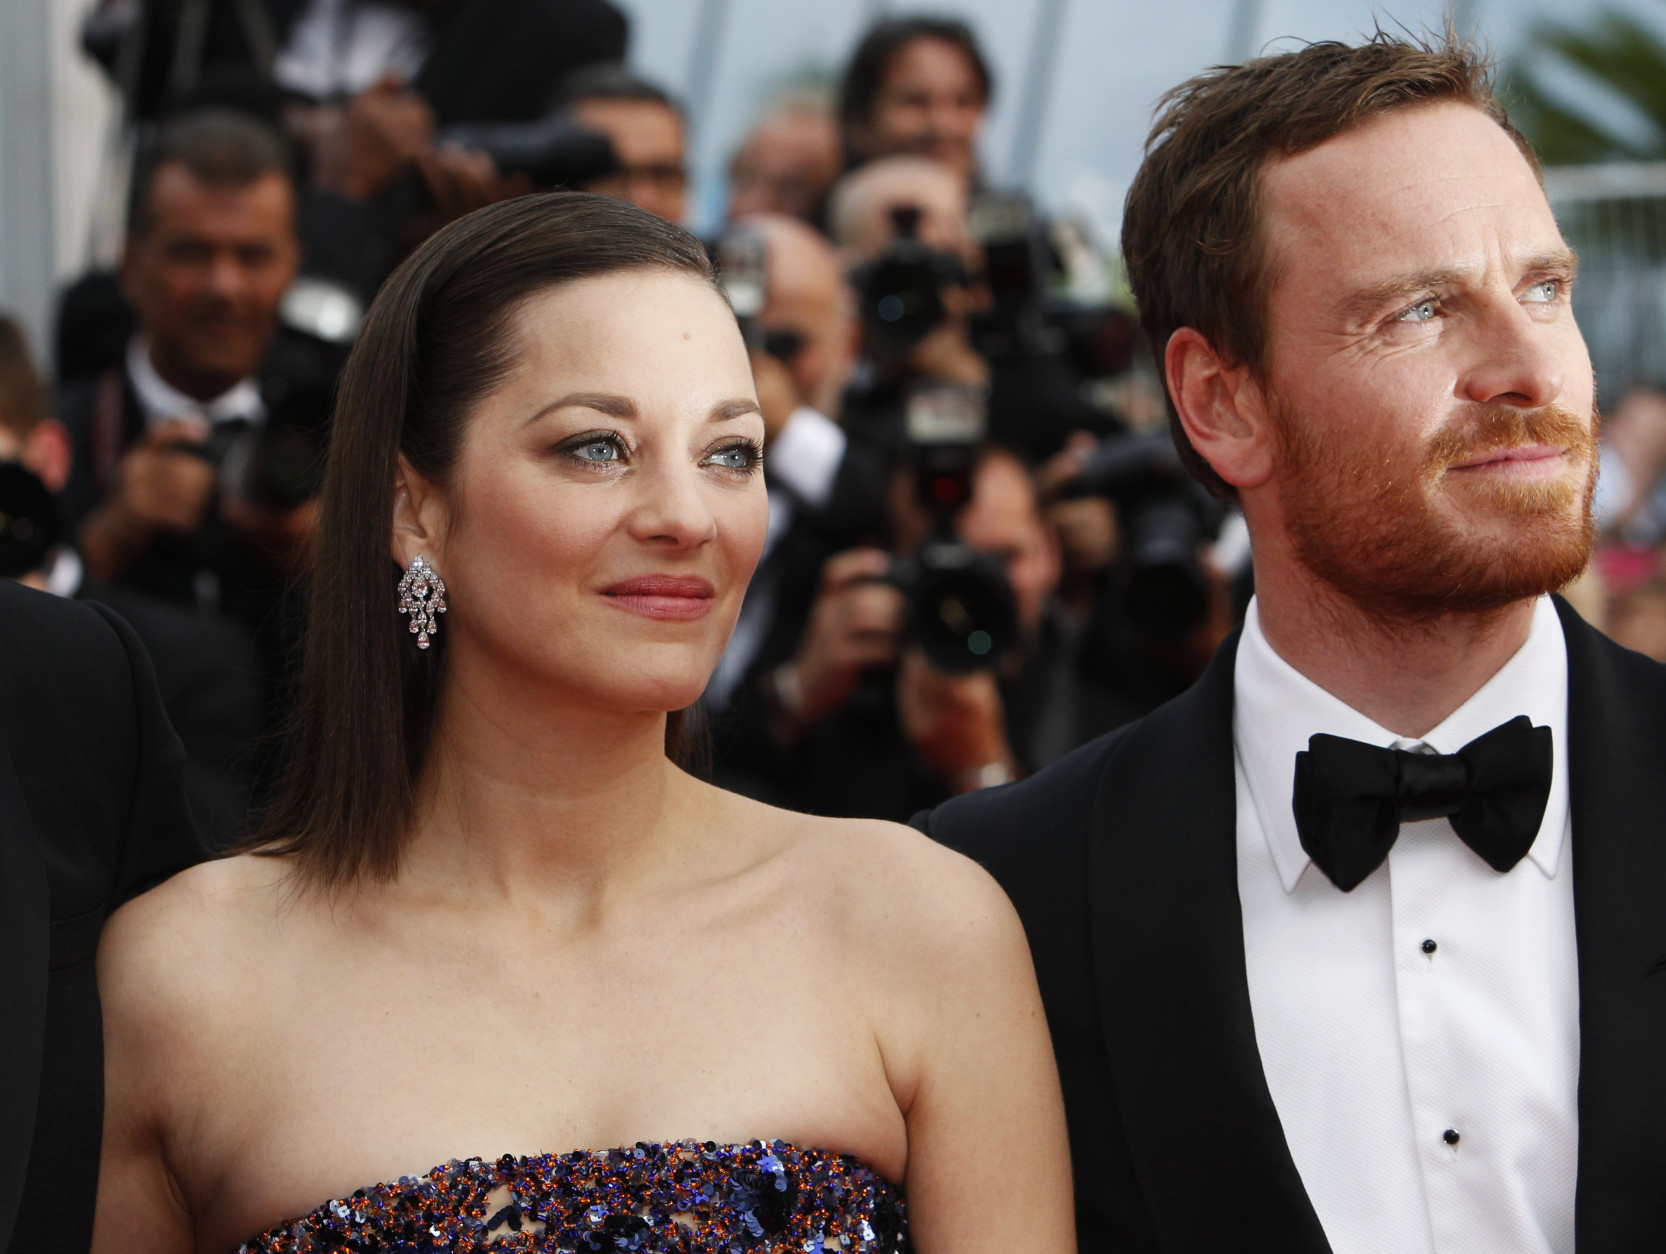 Actors Marion Cotillard and Michael Fassbender pose for photographers upon arrival for the screening of the film Macbeth at the 68th international film festival, Cannes, southern France, Saturday, May 23, 2015. (AP Photo/Lionel Cironneau)